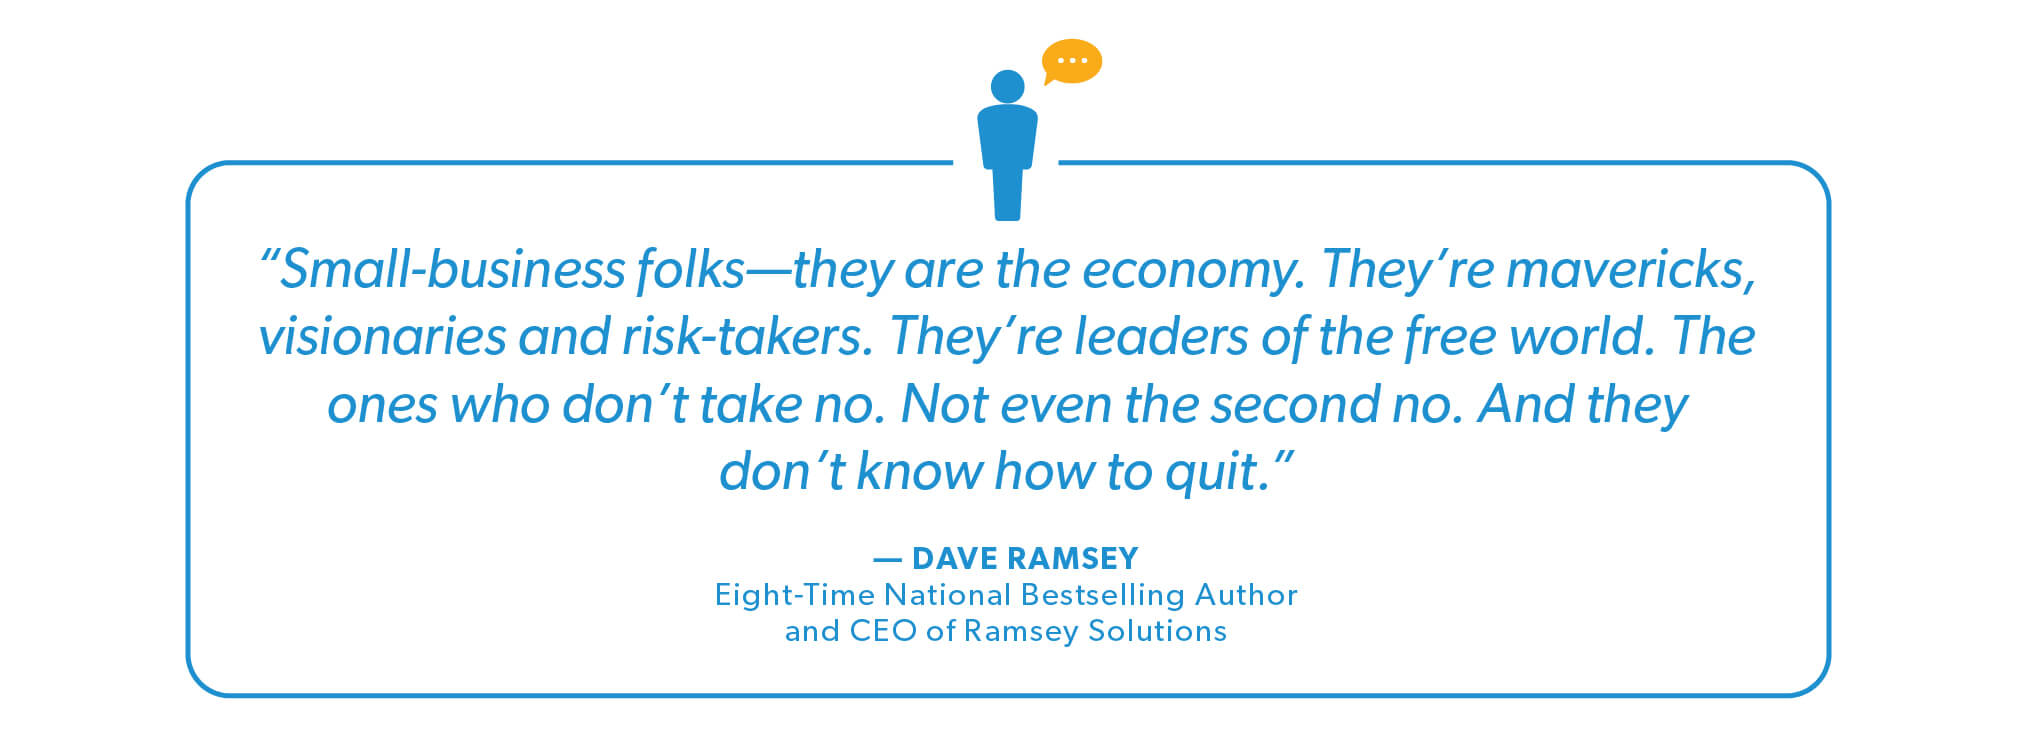 Dave Ramsey quote about small-business